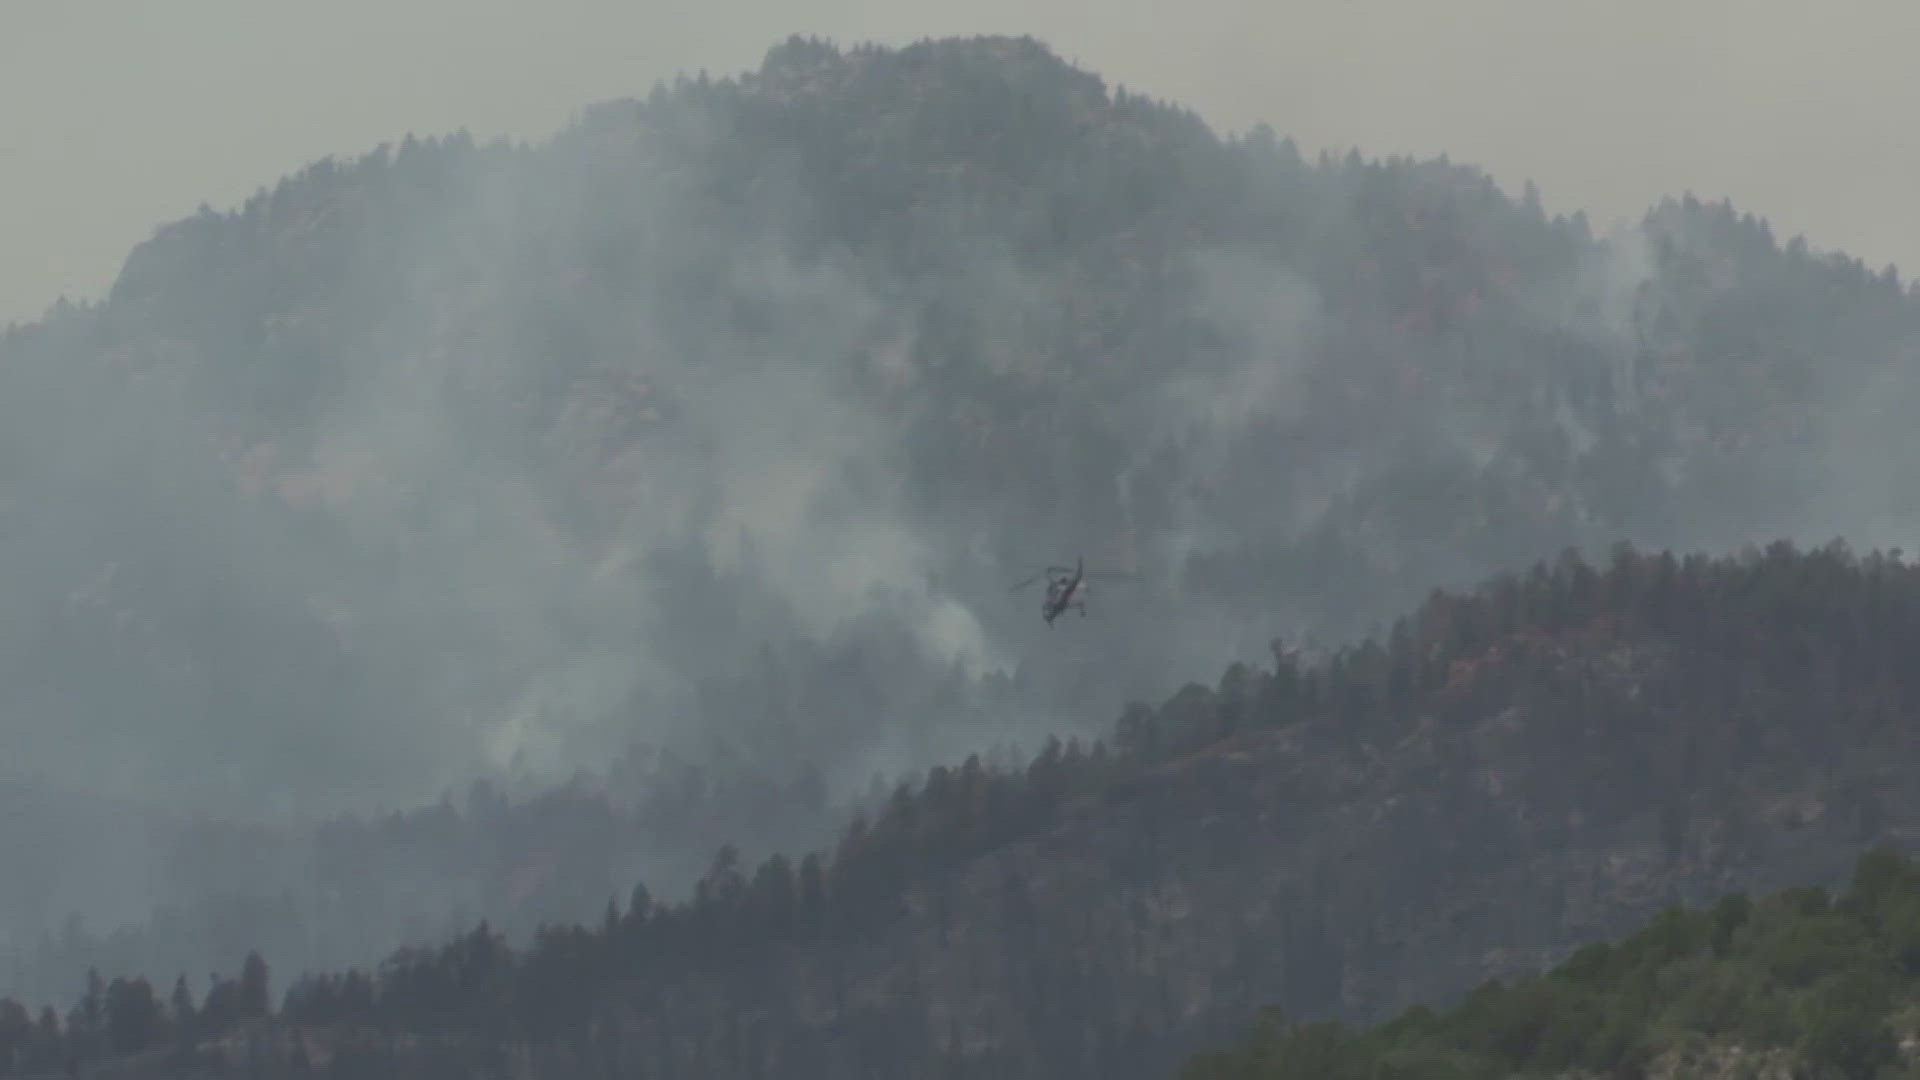 Officials say the fire is just over 1,000 acres in size with zero containment.